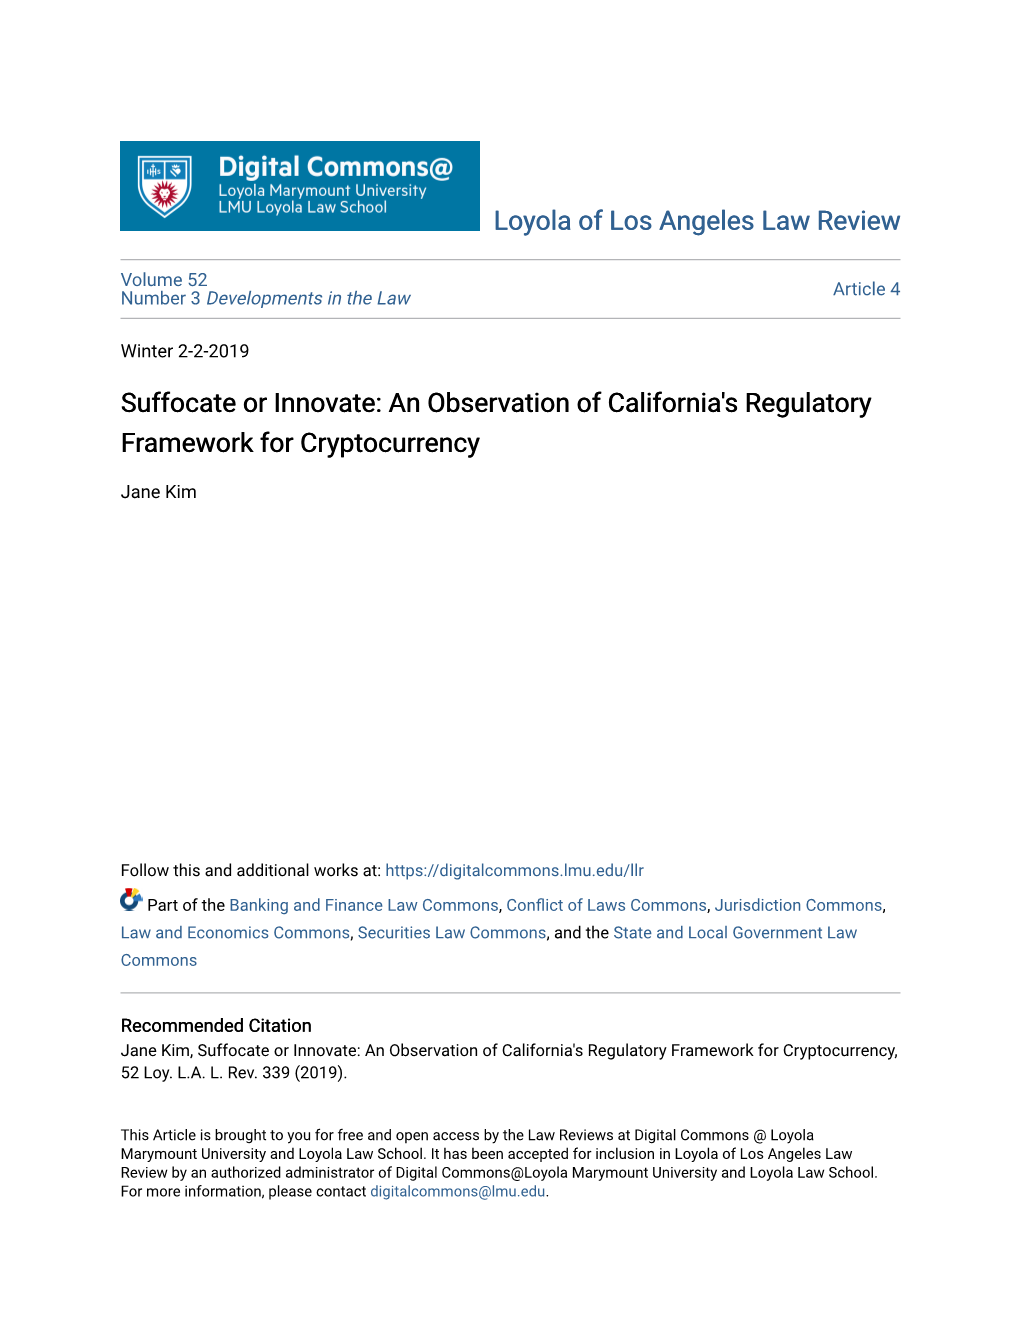 An Observation of California's Regulatory Framework for Cryptocurrency